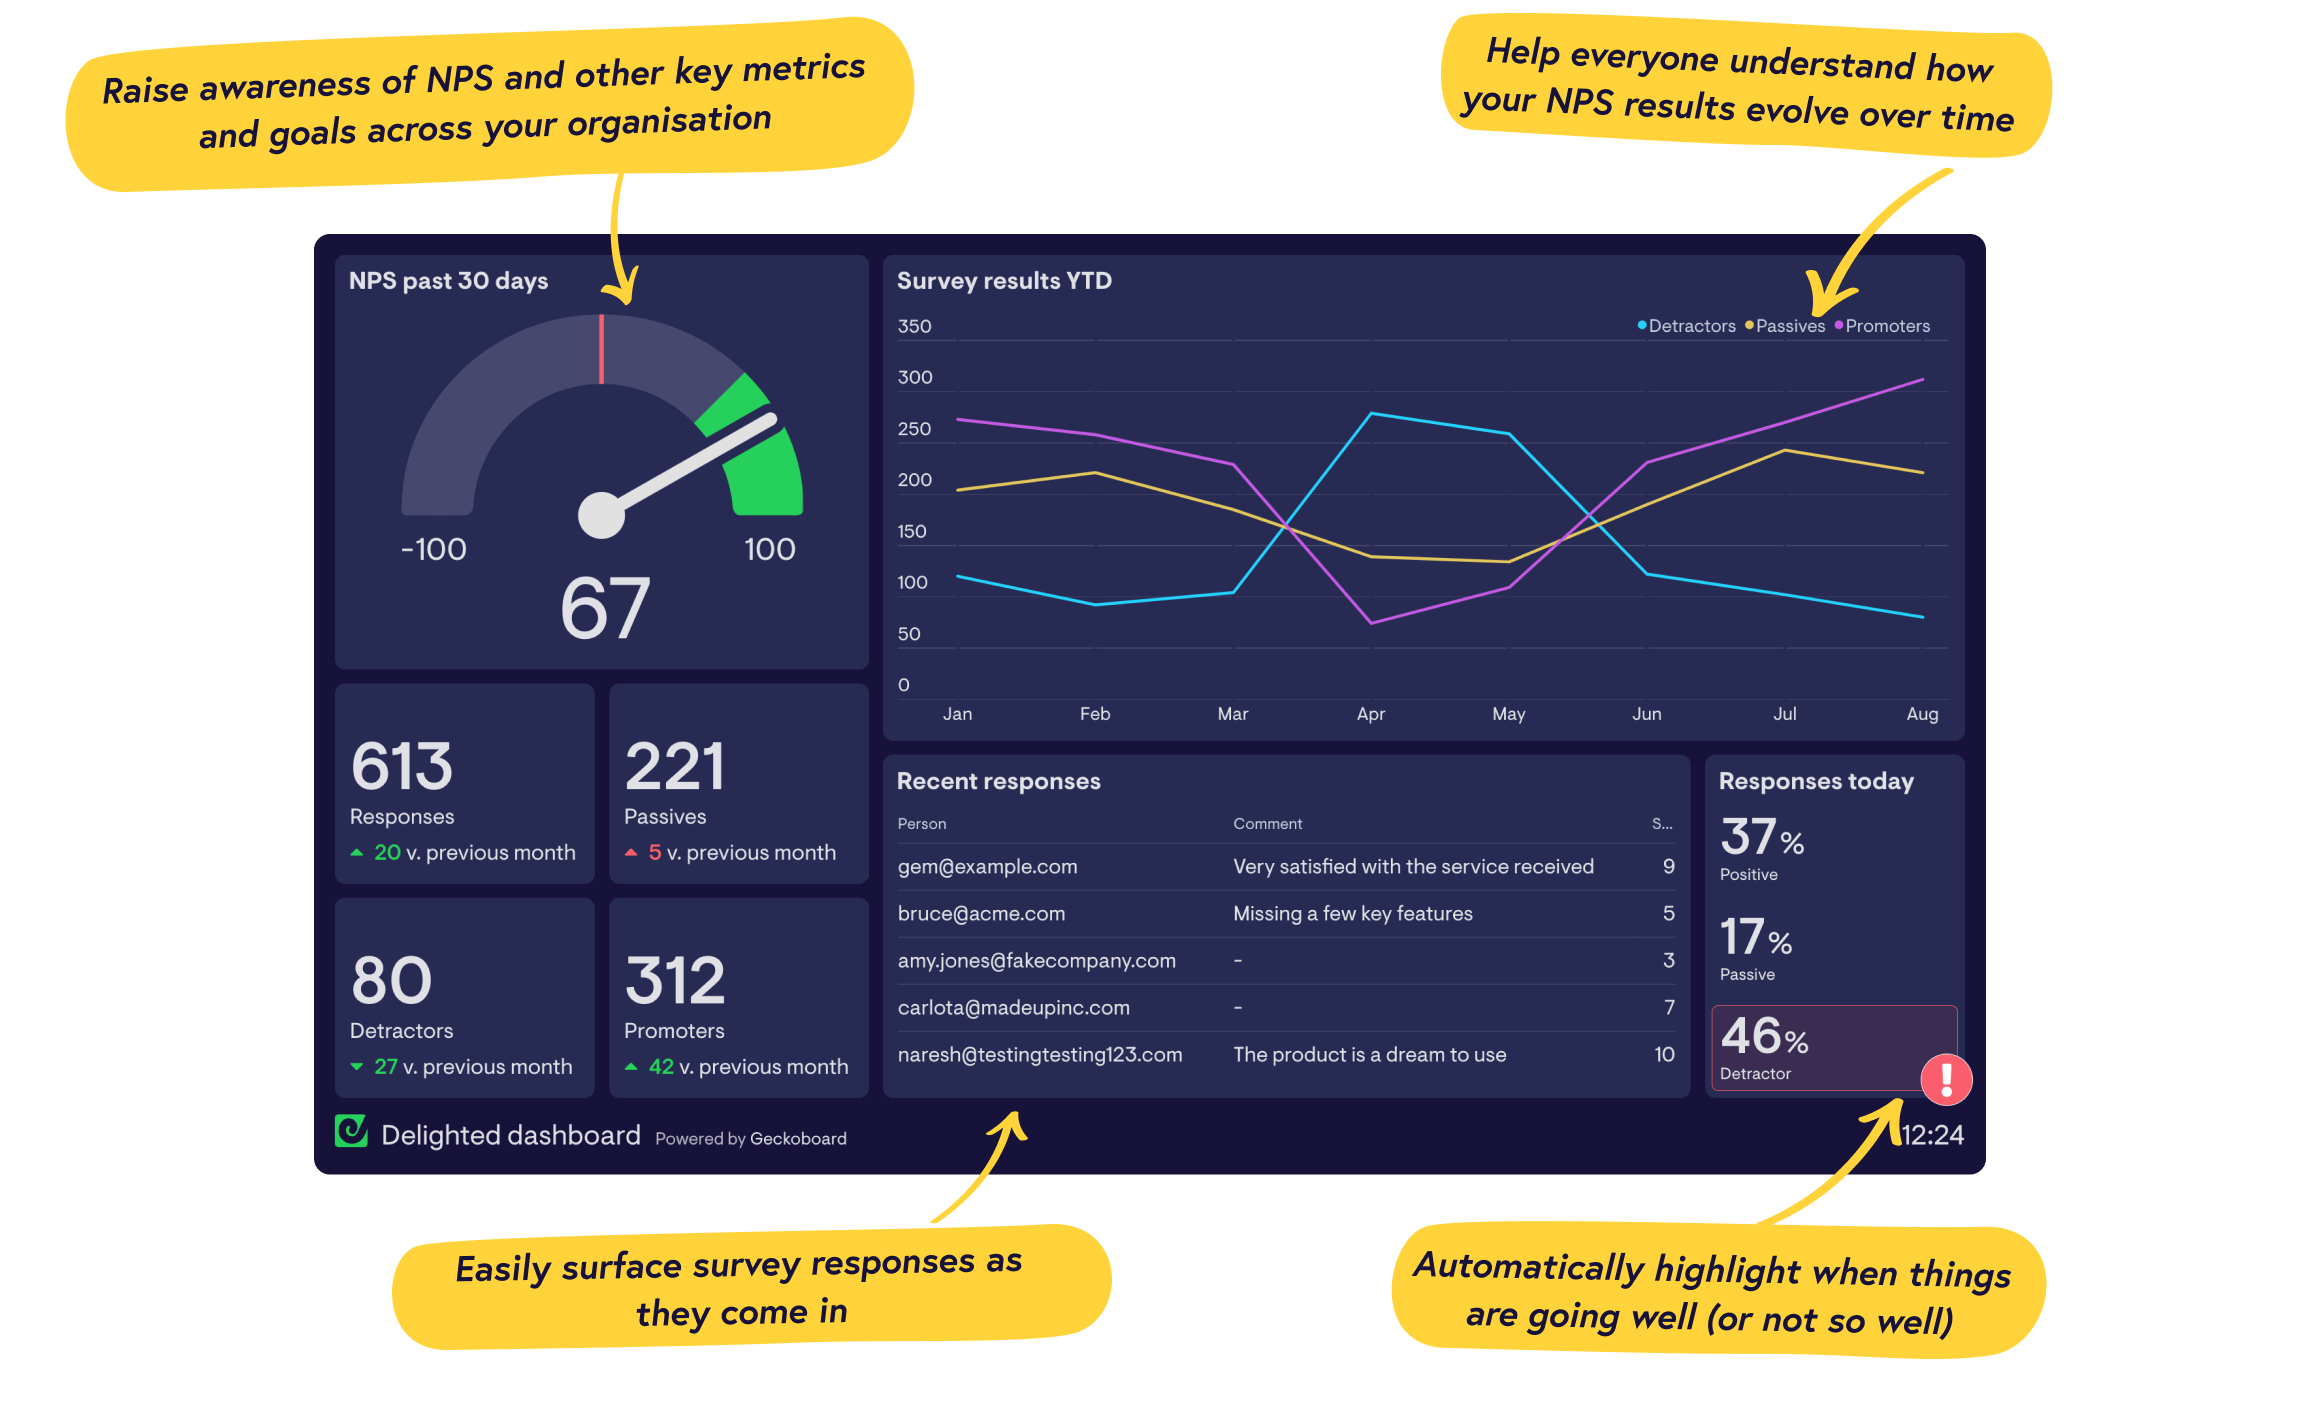 Real-time Delighted dashboards from Geckoboard